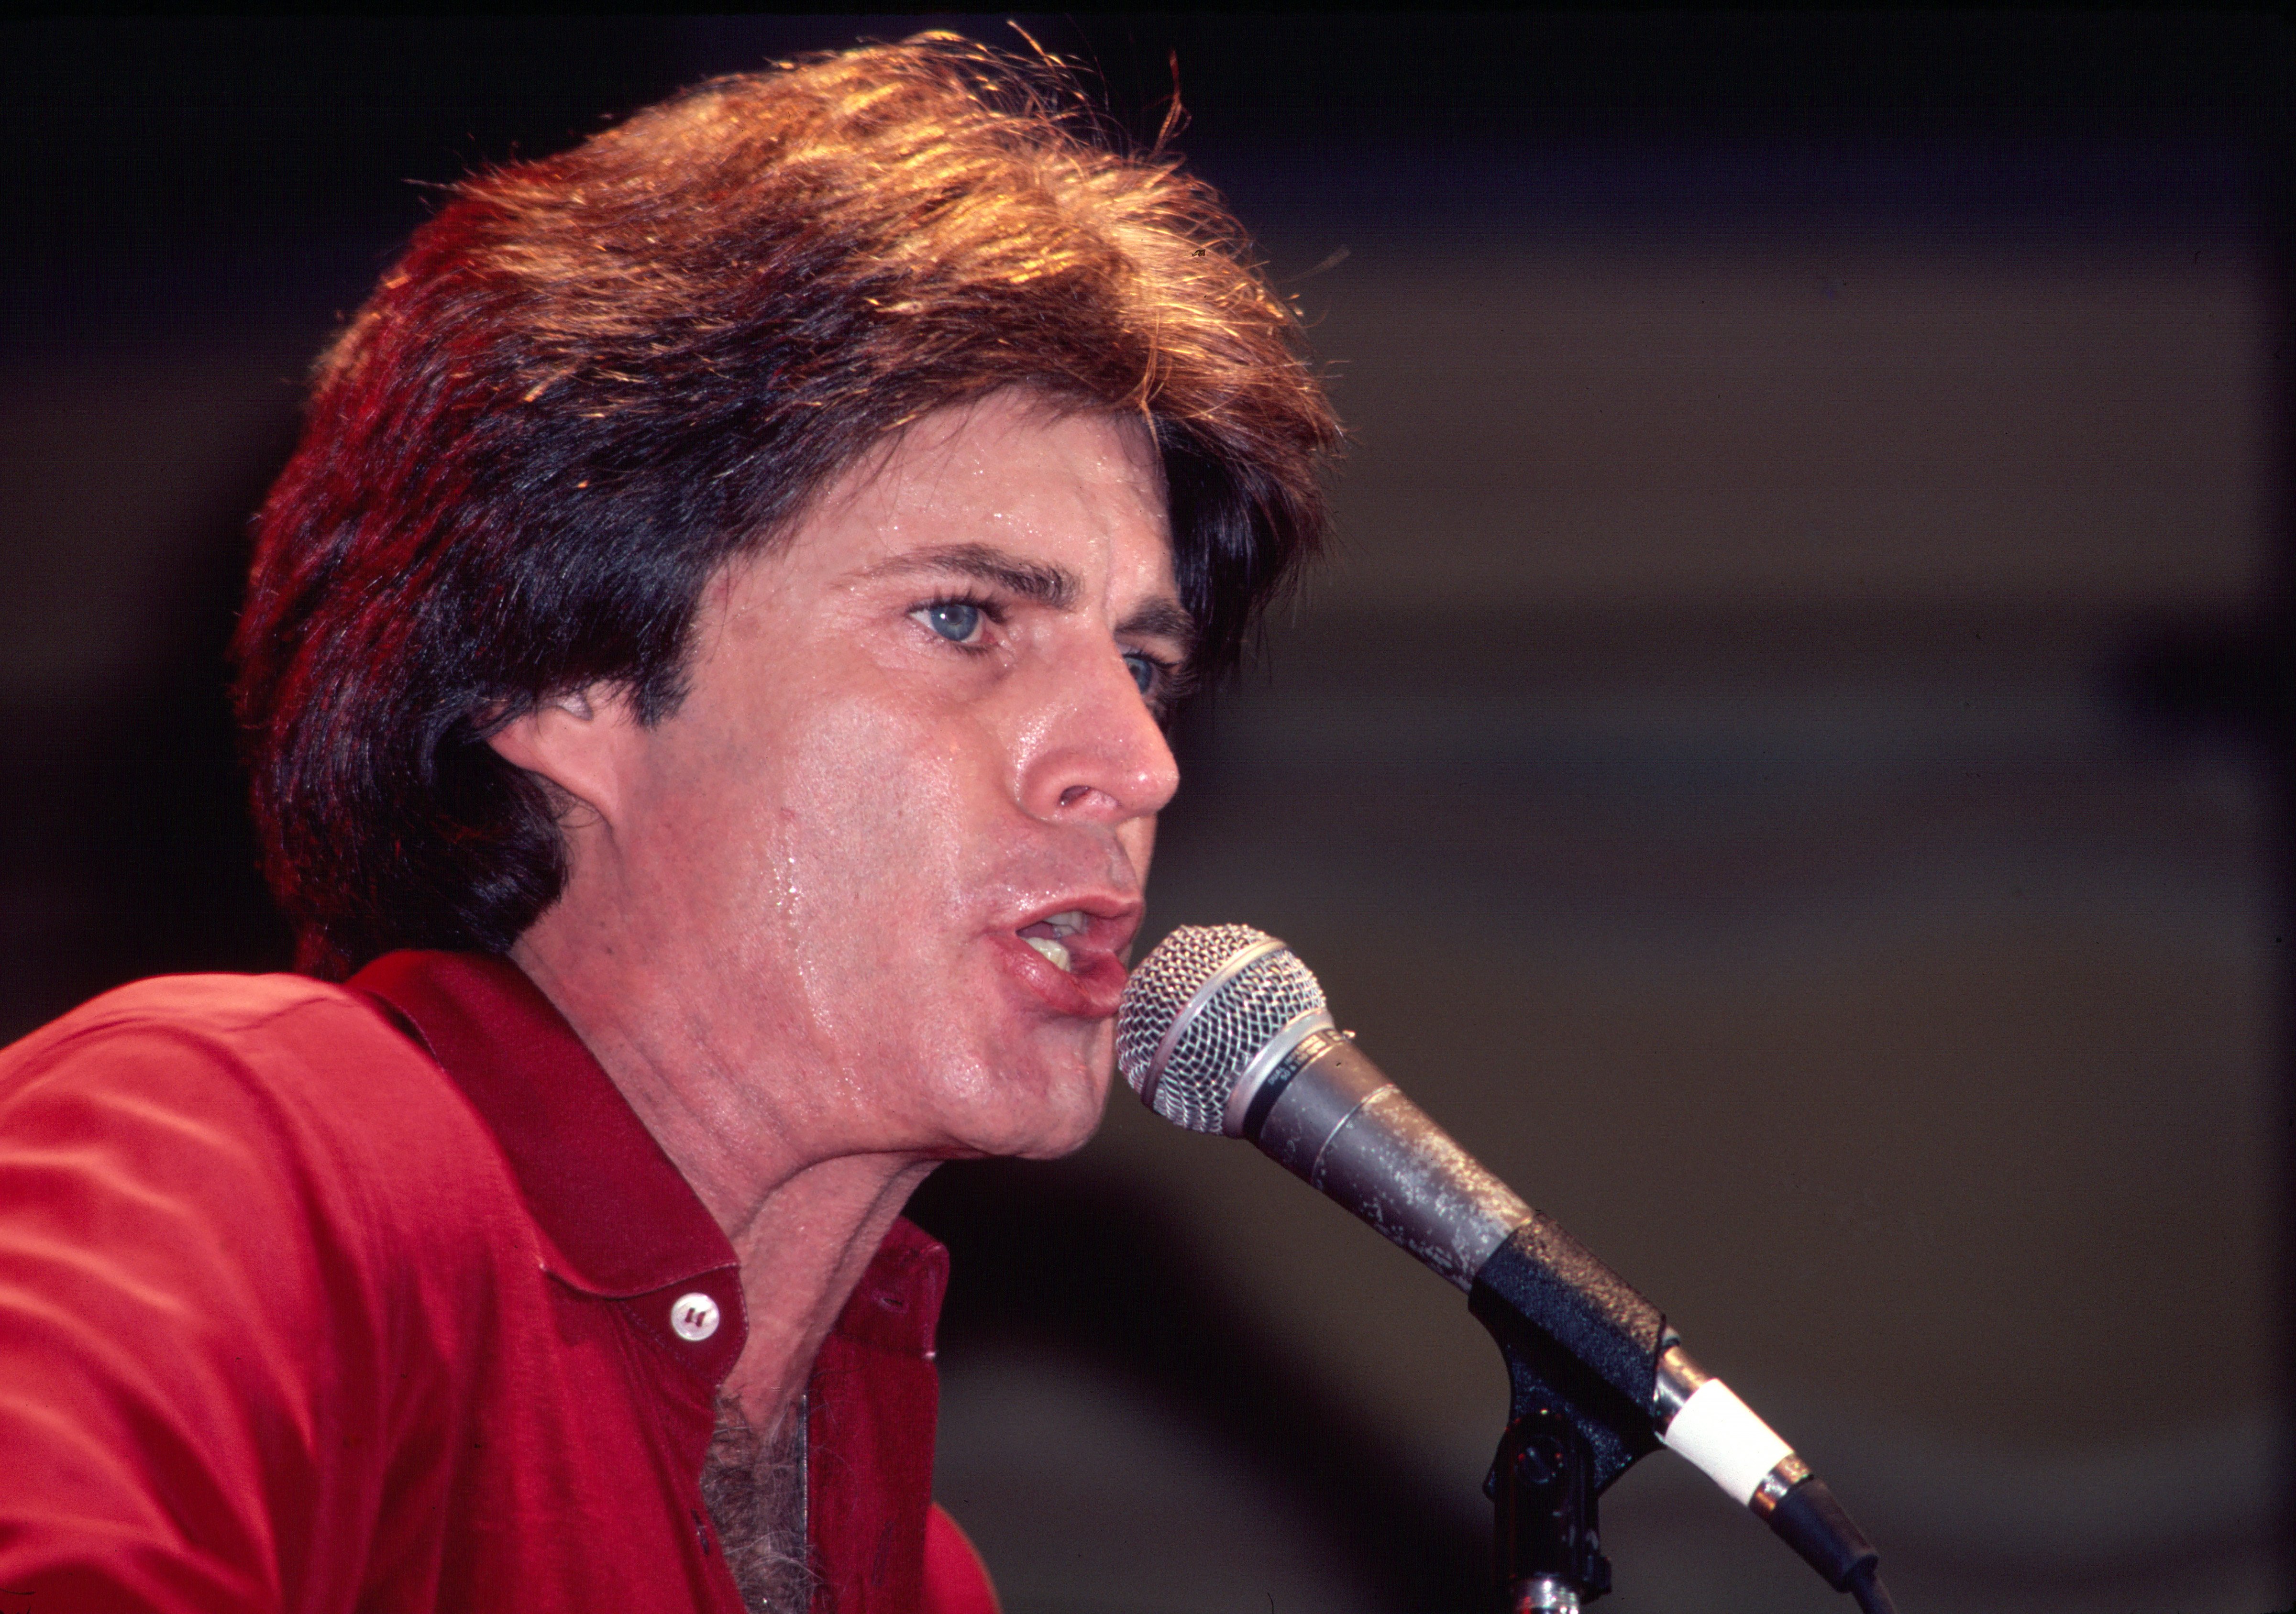 Ricky Nelson performs onstage at the Ritz, New York, on February 24, 1981 | Source: Getty Images